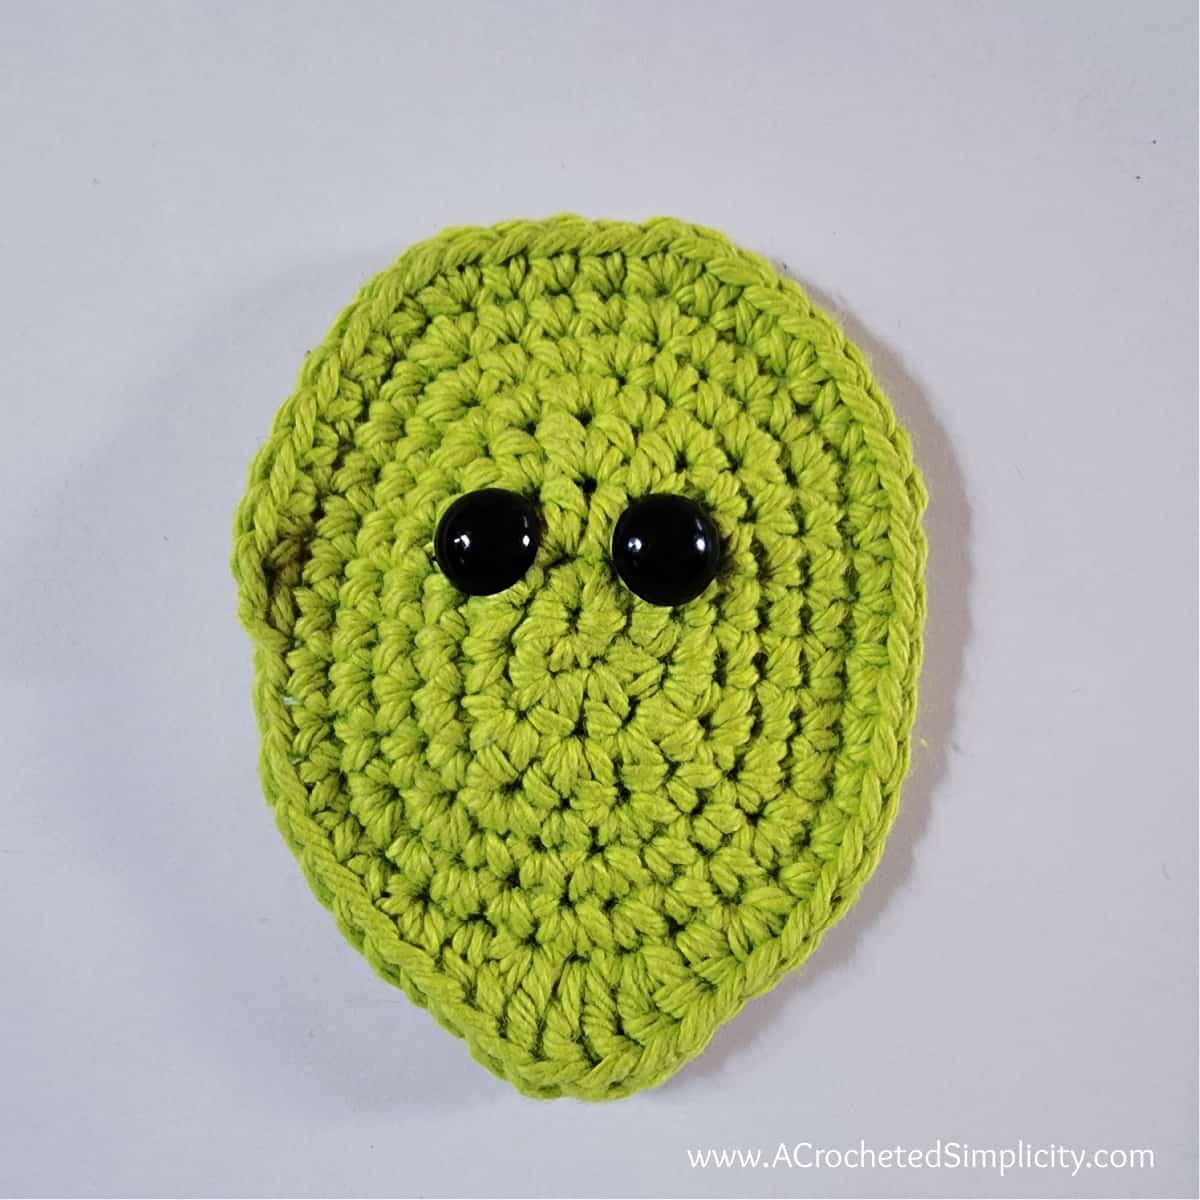 Crochet oval in green for small witch face with two black eyes.